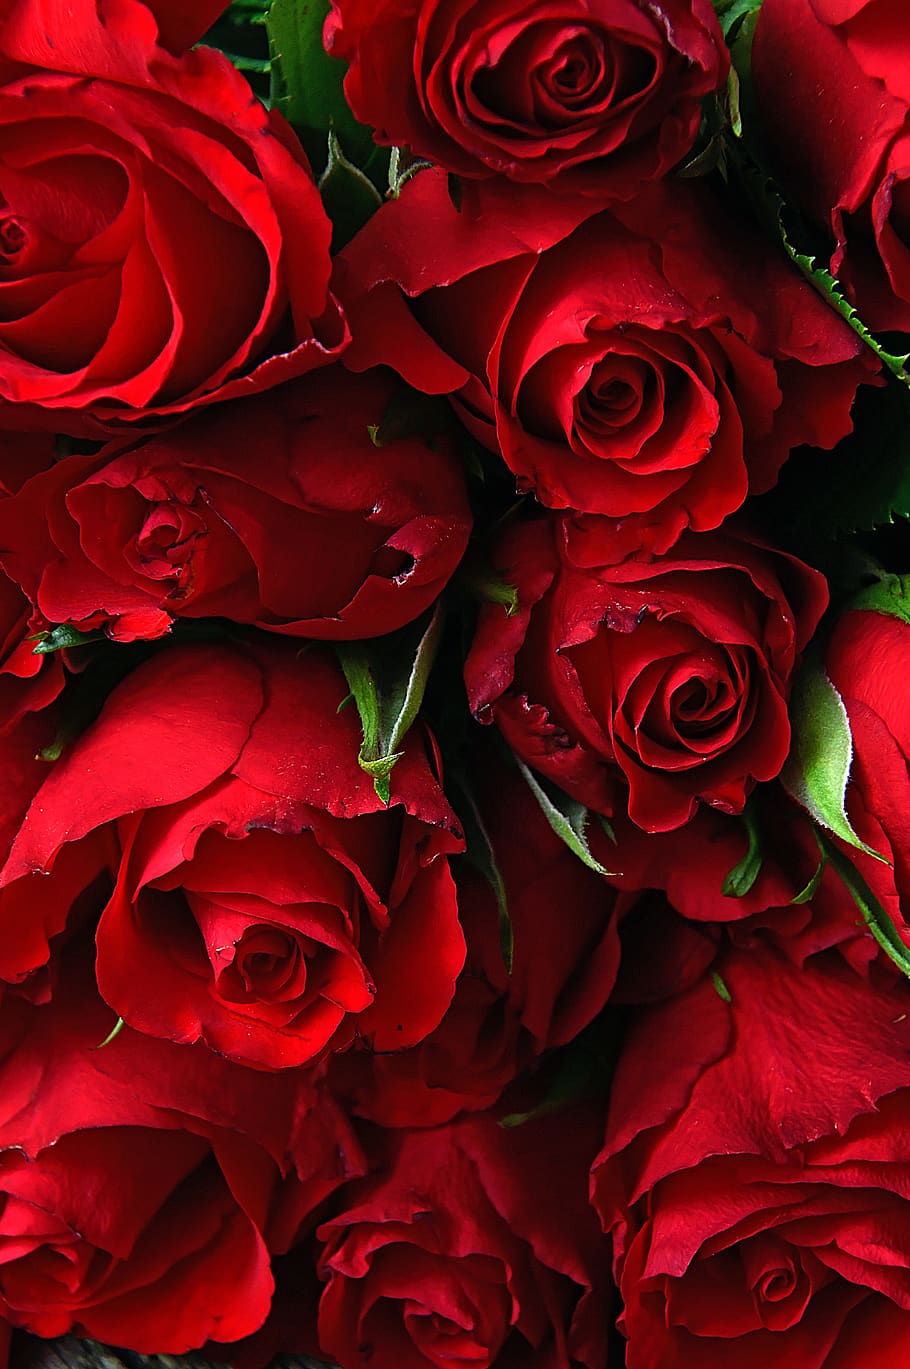 Download Rose Wallpaper Hd for desktop or mobile device Make your device  cooler and more beautiful  Beautiful red roses Beautiful rose flowers  Red roses